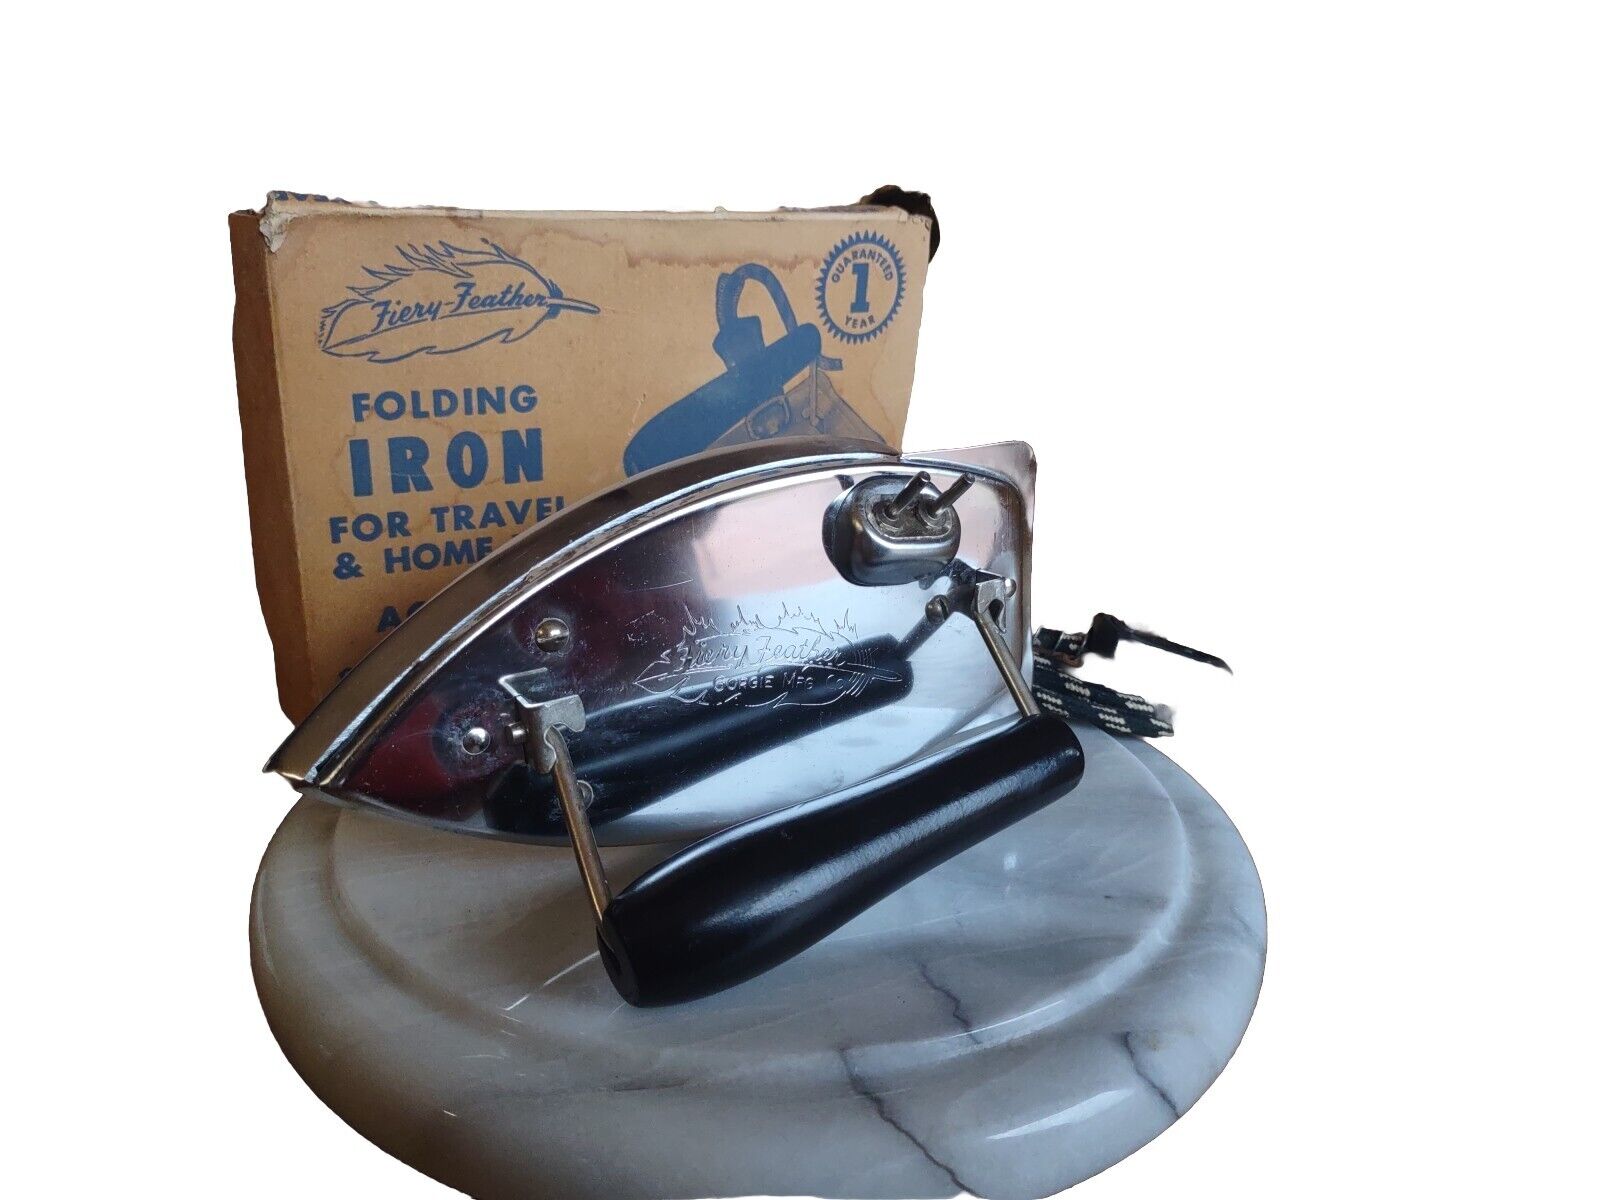 Working Vtg Fiery-Feather folding travel Iron original box and cord, gets HOT